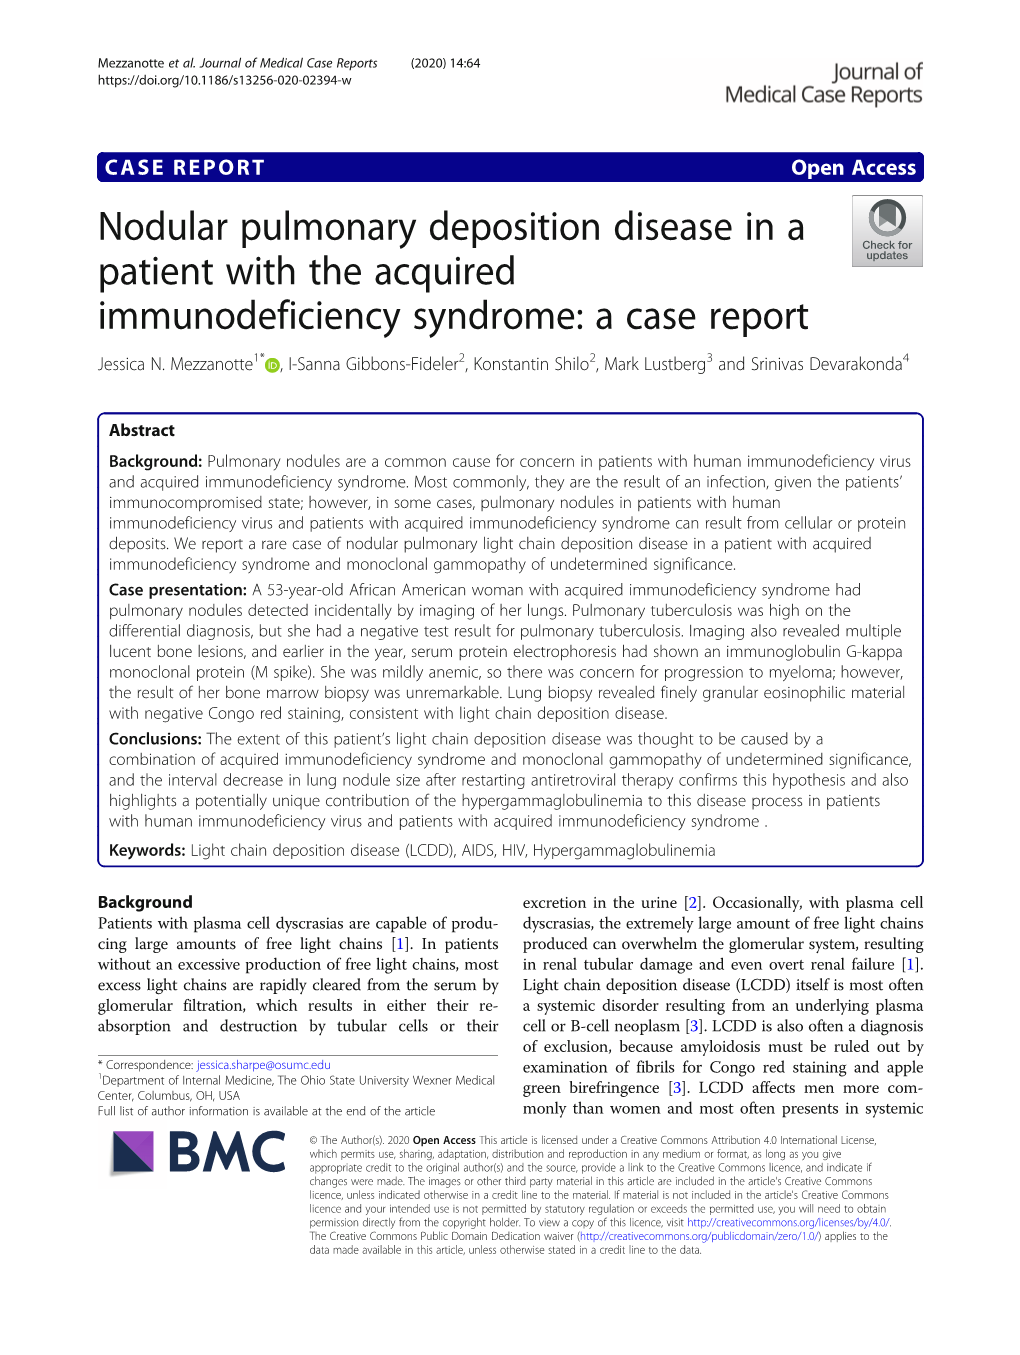 Nodular Pulmonary Deposition Disease in a Patient with the Acquired Immunodeficiency Syndrome: a Case Report Jessica N